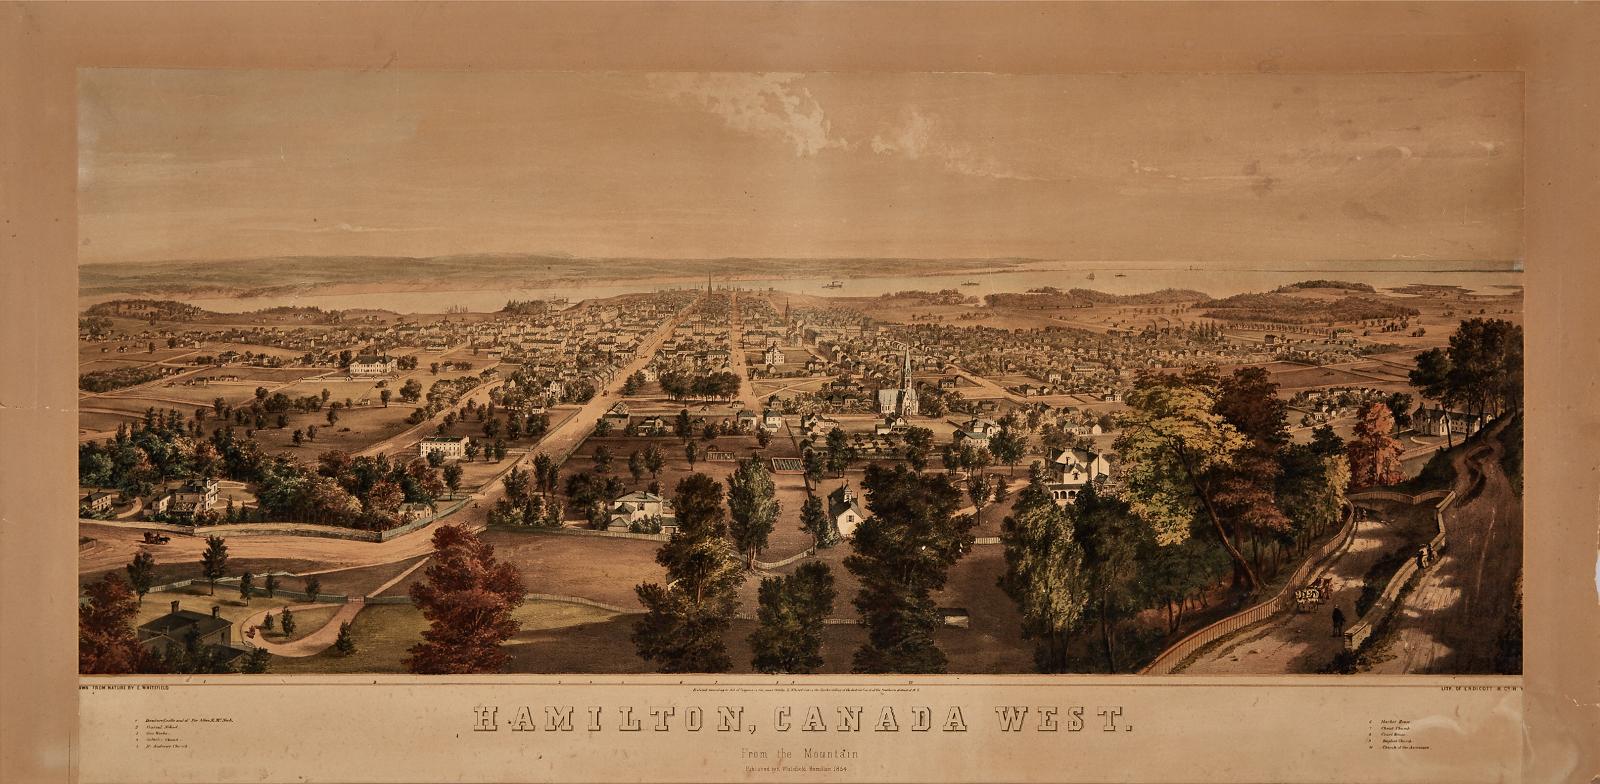 Edwin Whitefield (1816-1892) - Hamilton, Canada West, From The Moutain, 1854